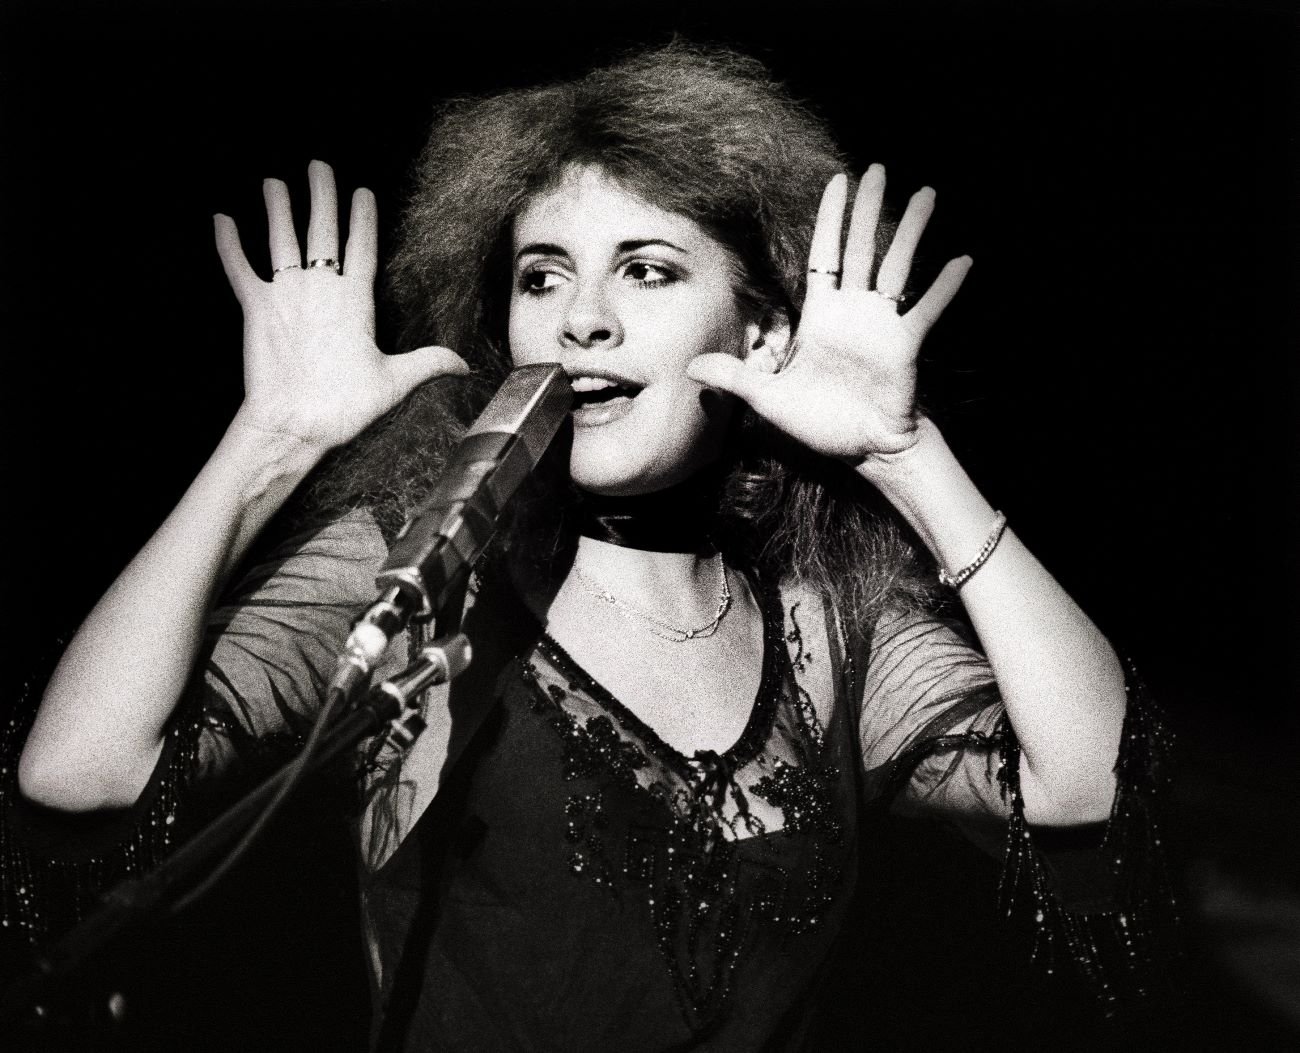 A black and white photo of Stevie Nicks wearing a sheer dress and standing in front of a microphone.